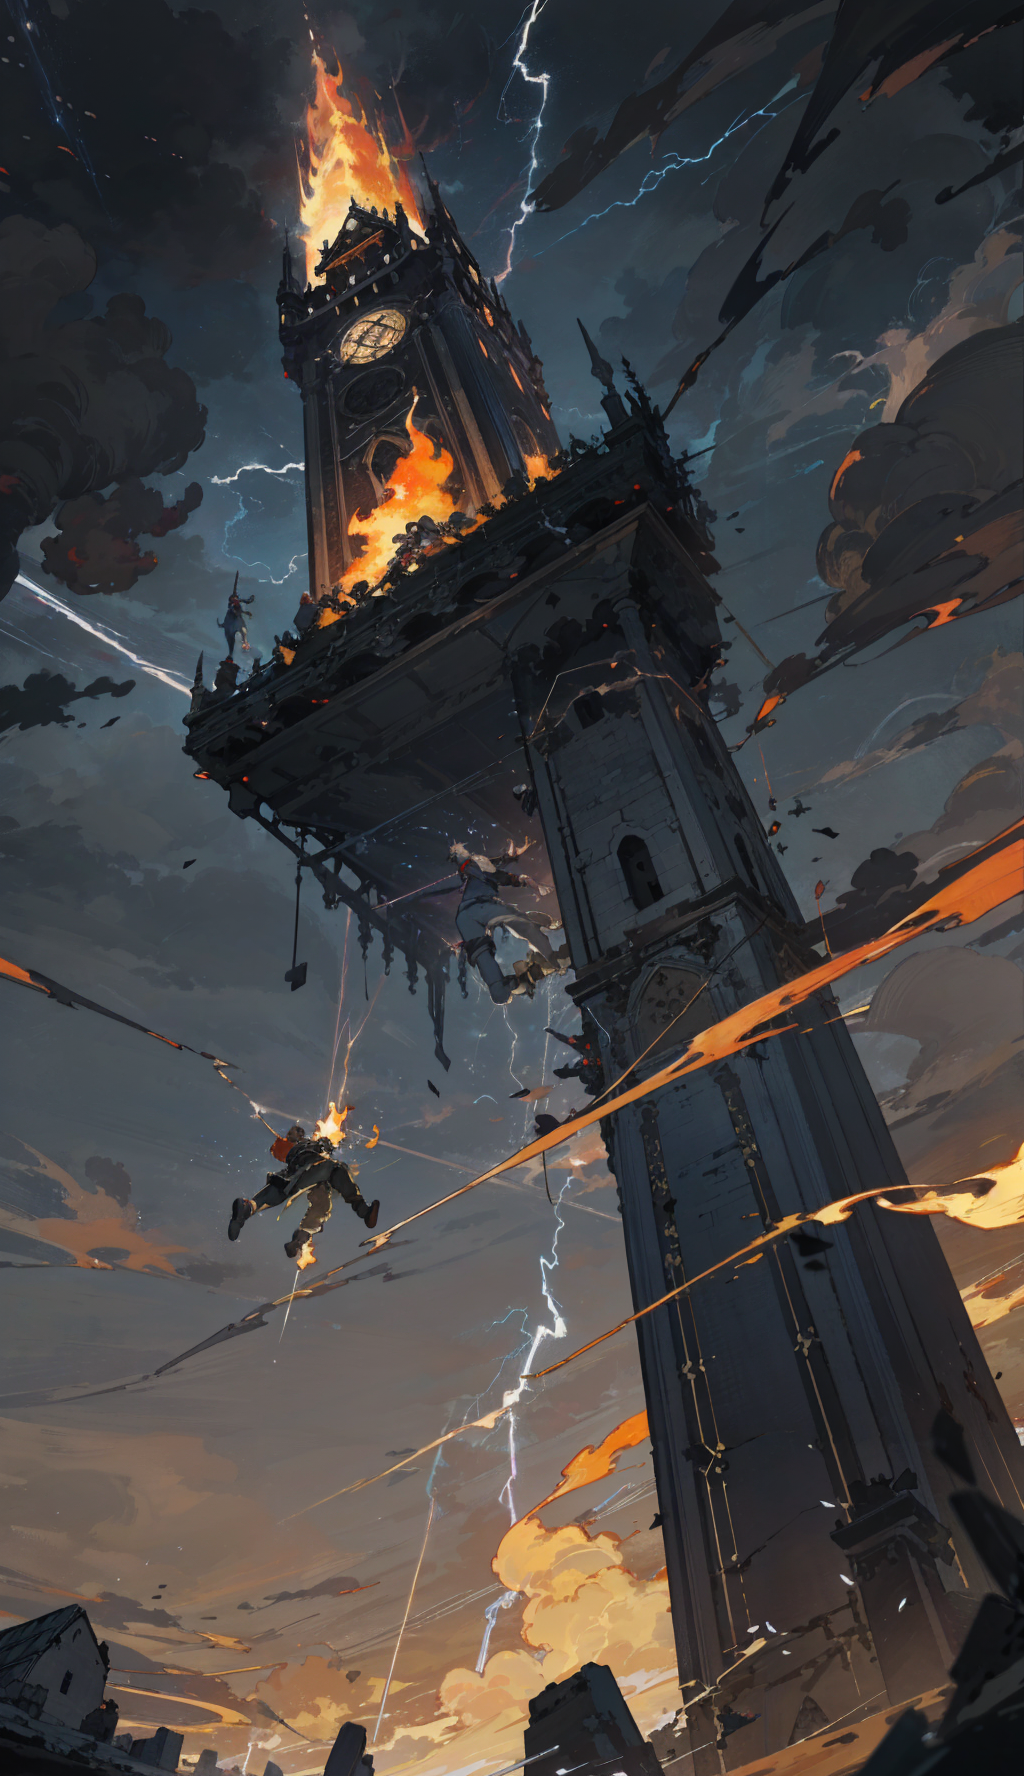 A fantasy scene with a clock tower, a skull, and a lightning bolt.